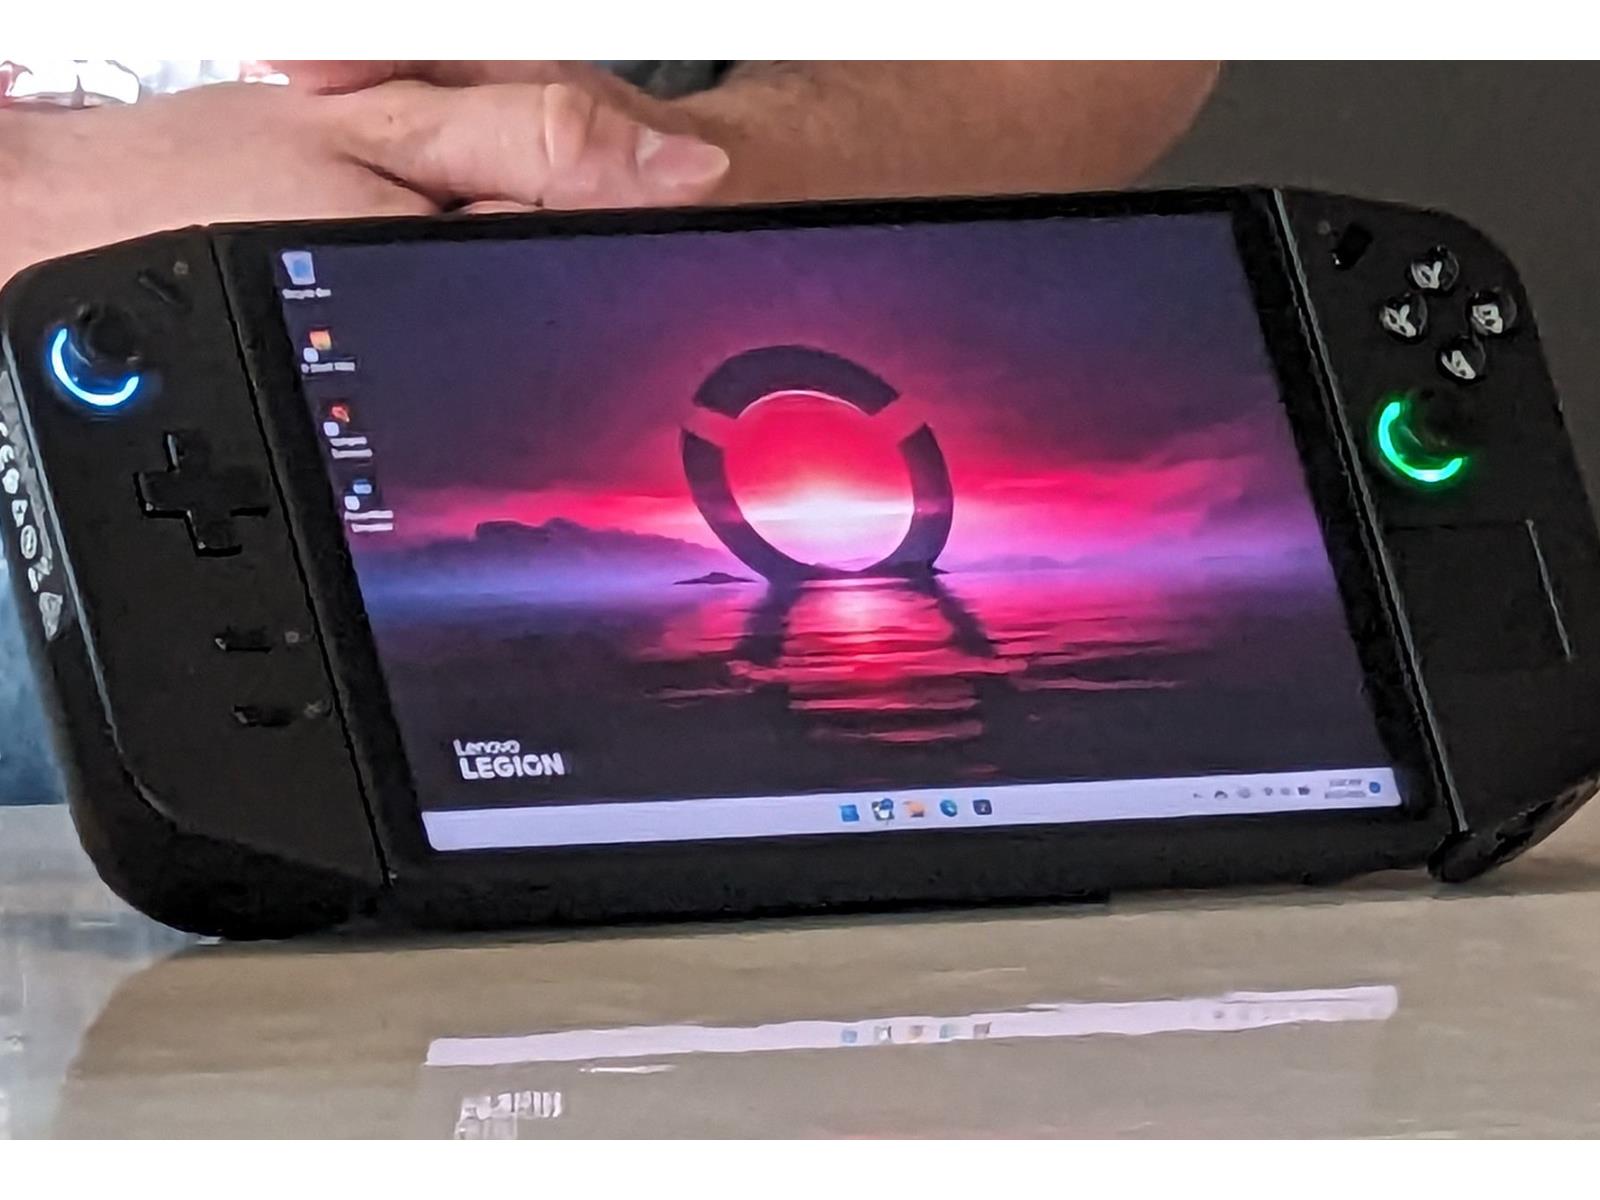 Lenovo Legion Go handheld gaming device leaks in official-looking images -   news